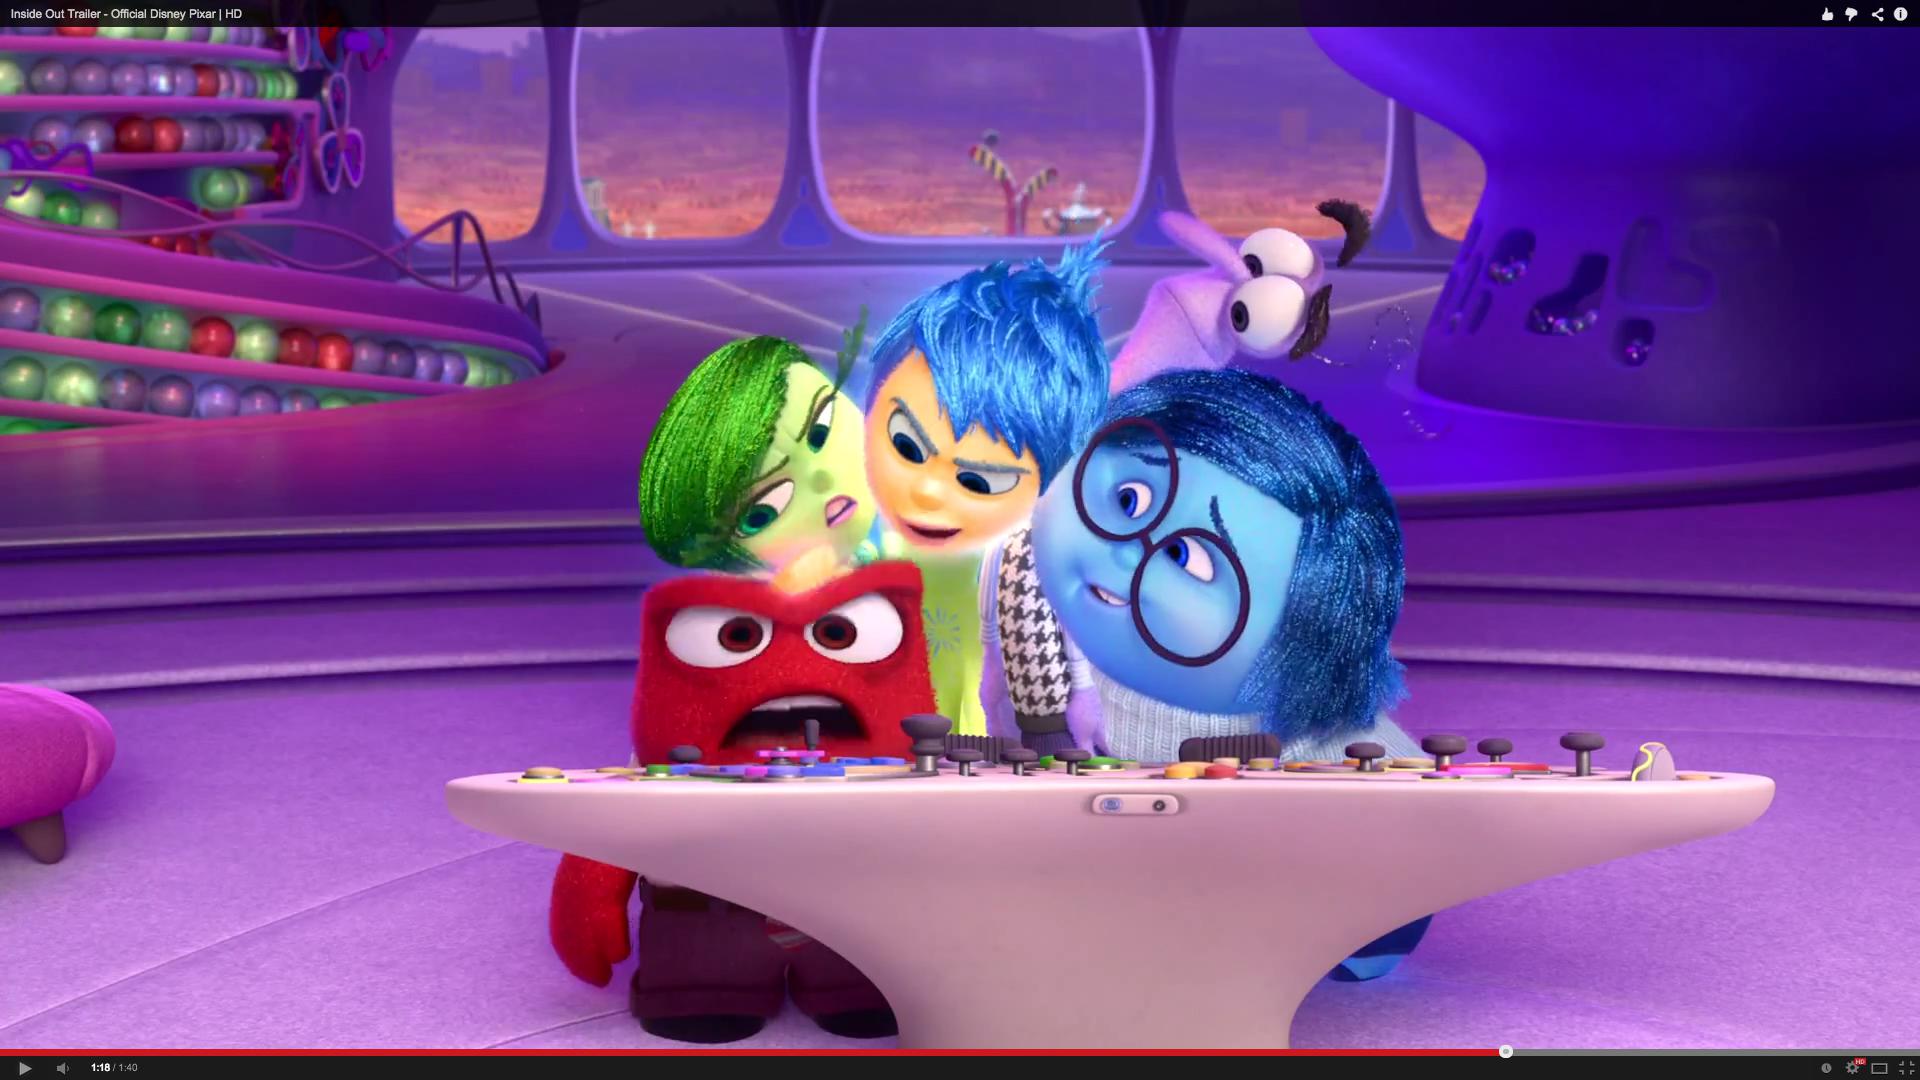 Inside Out trailer: Pixar and Disney movie is about emotions (VIDEO).